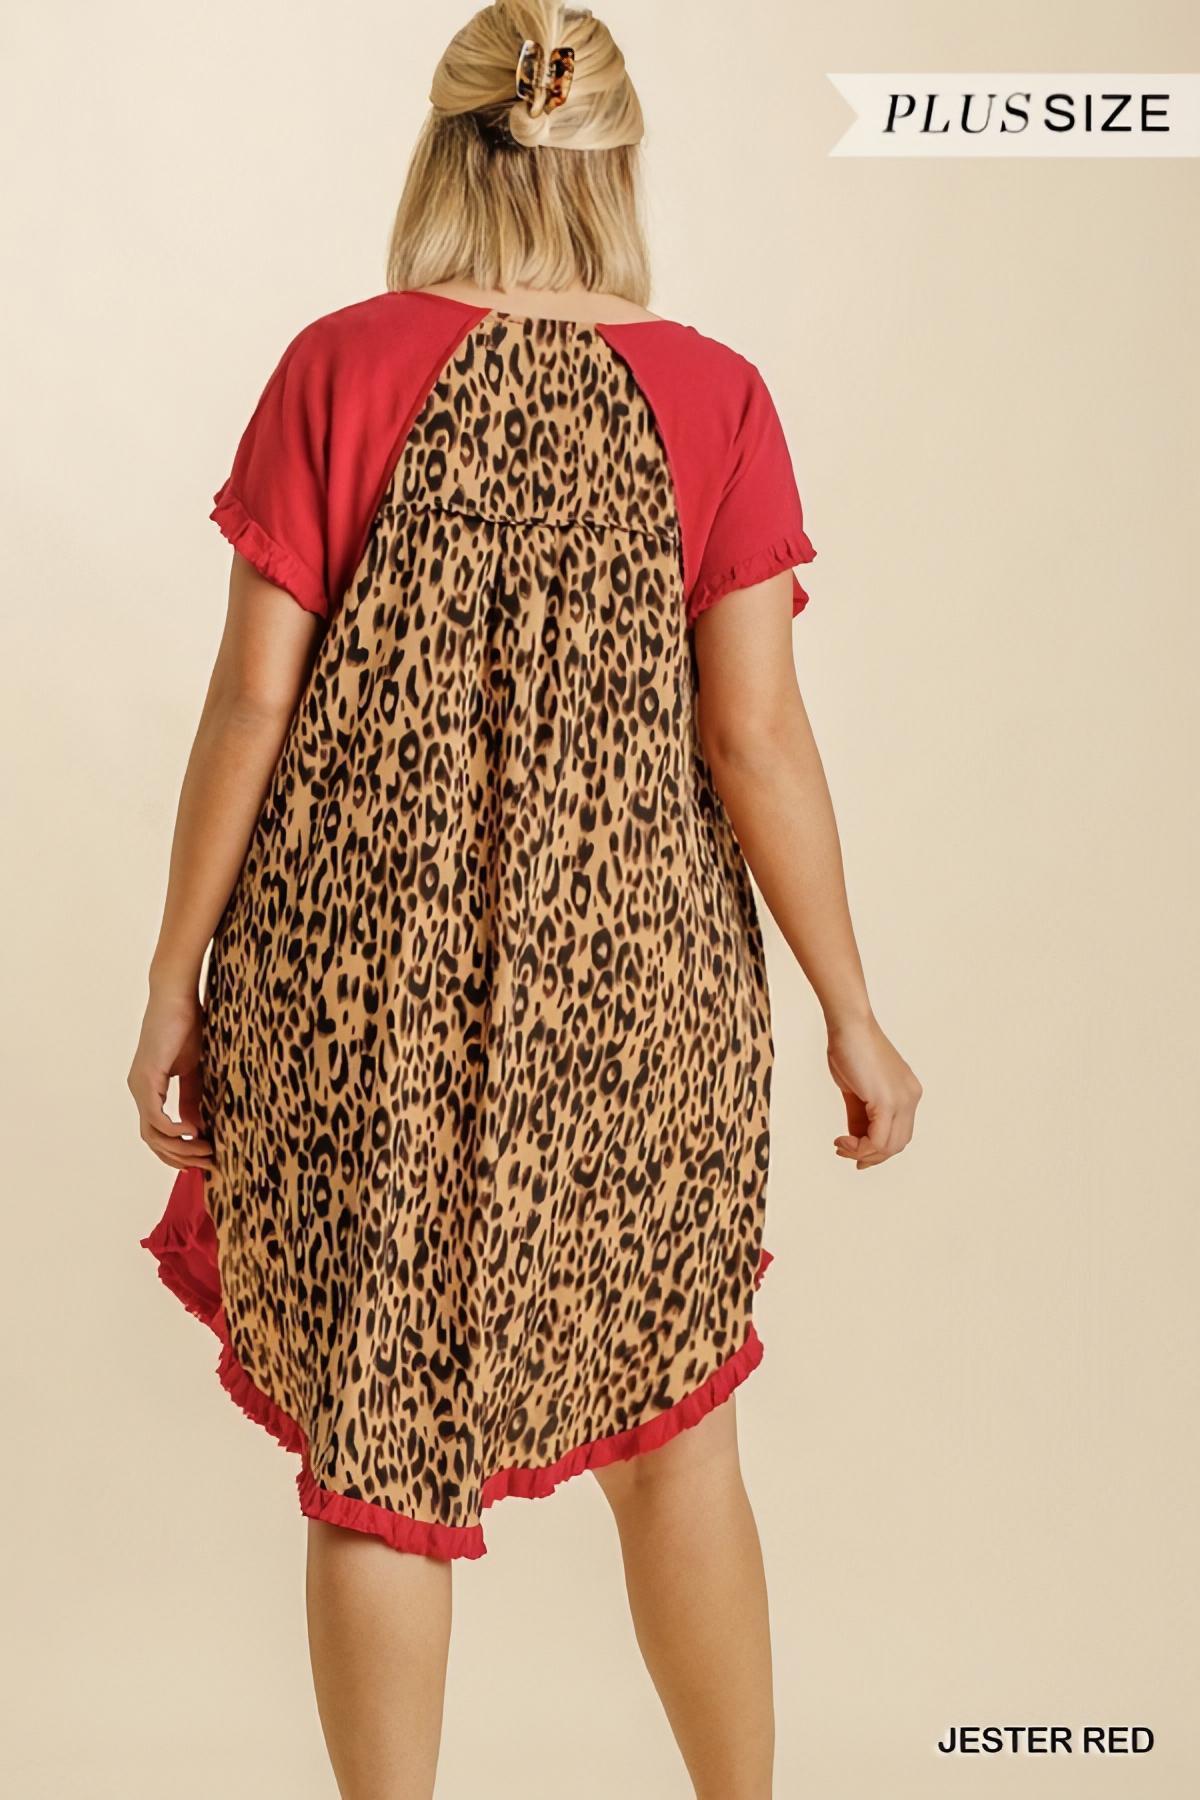 Linen Animal Print Back High-Low Dress in Plus by Umgee Clothing